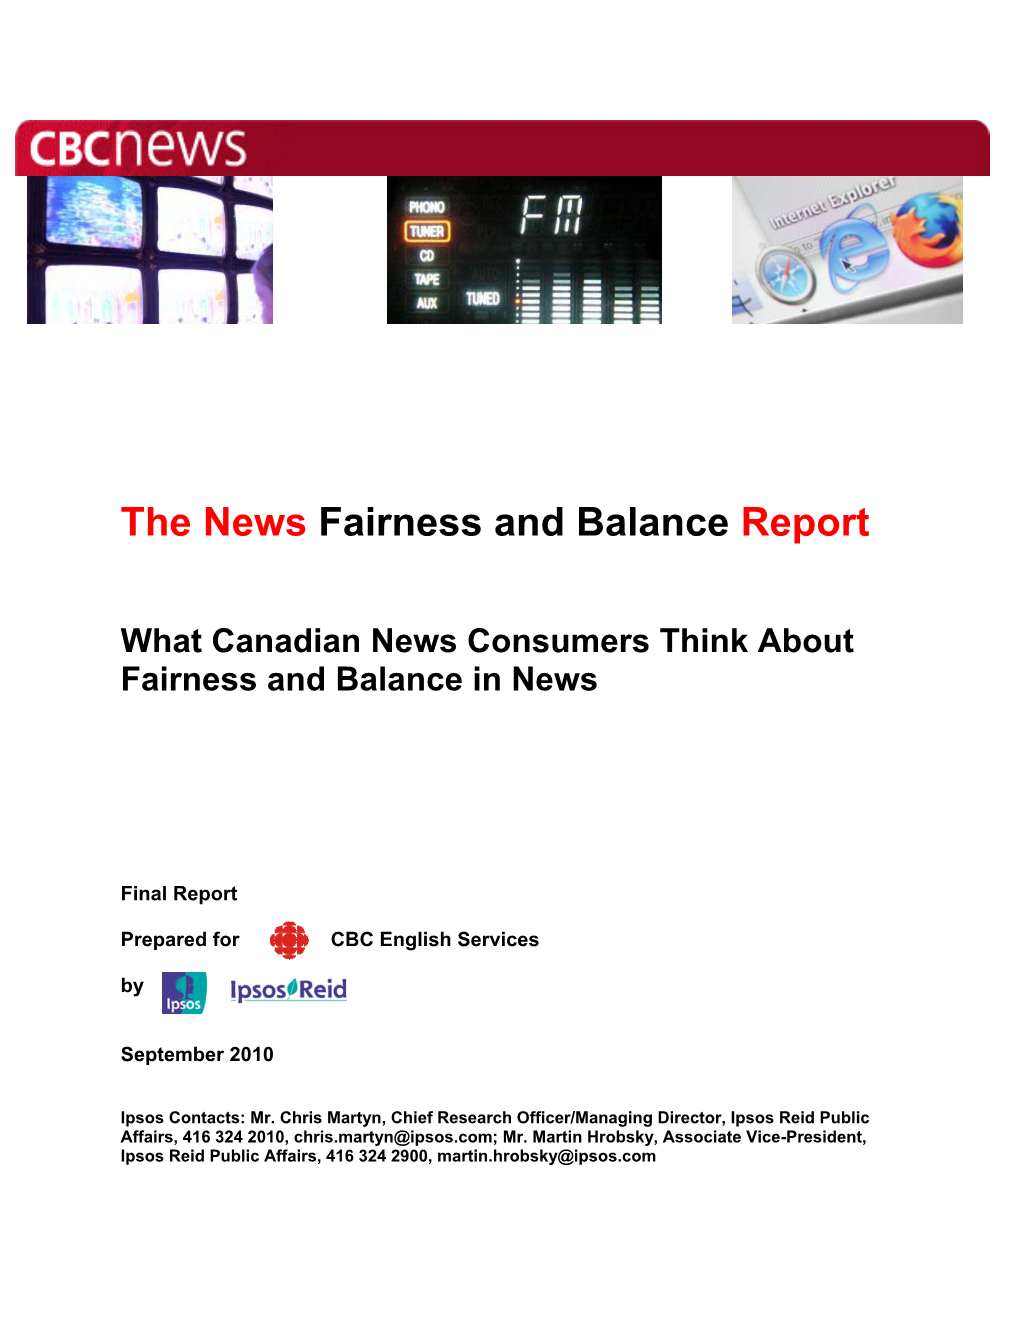 The News Fairness and Balance Report